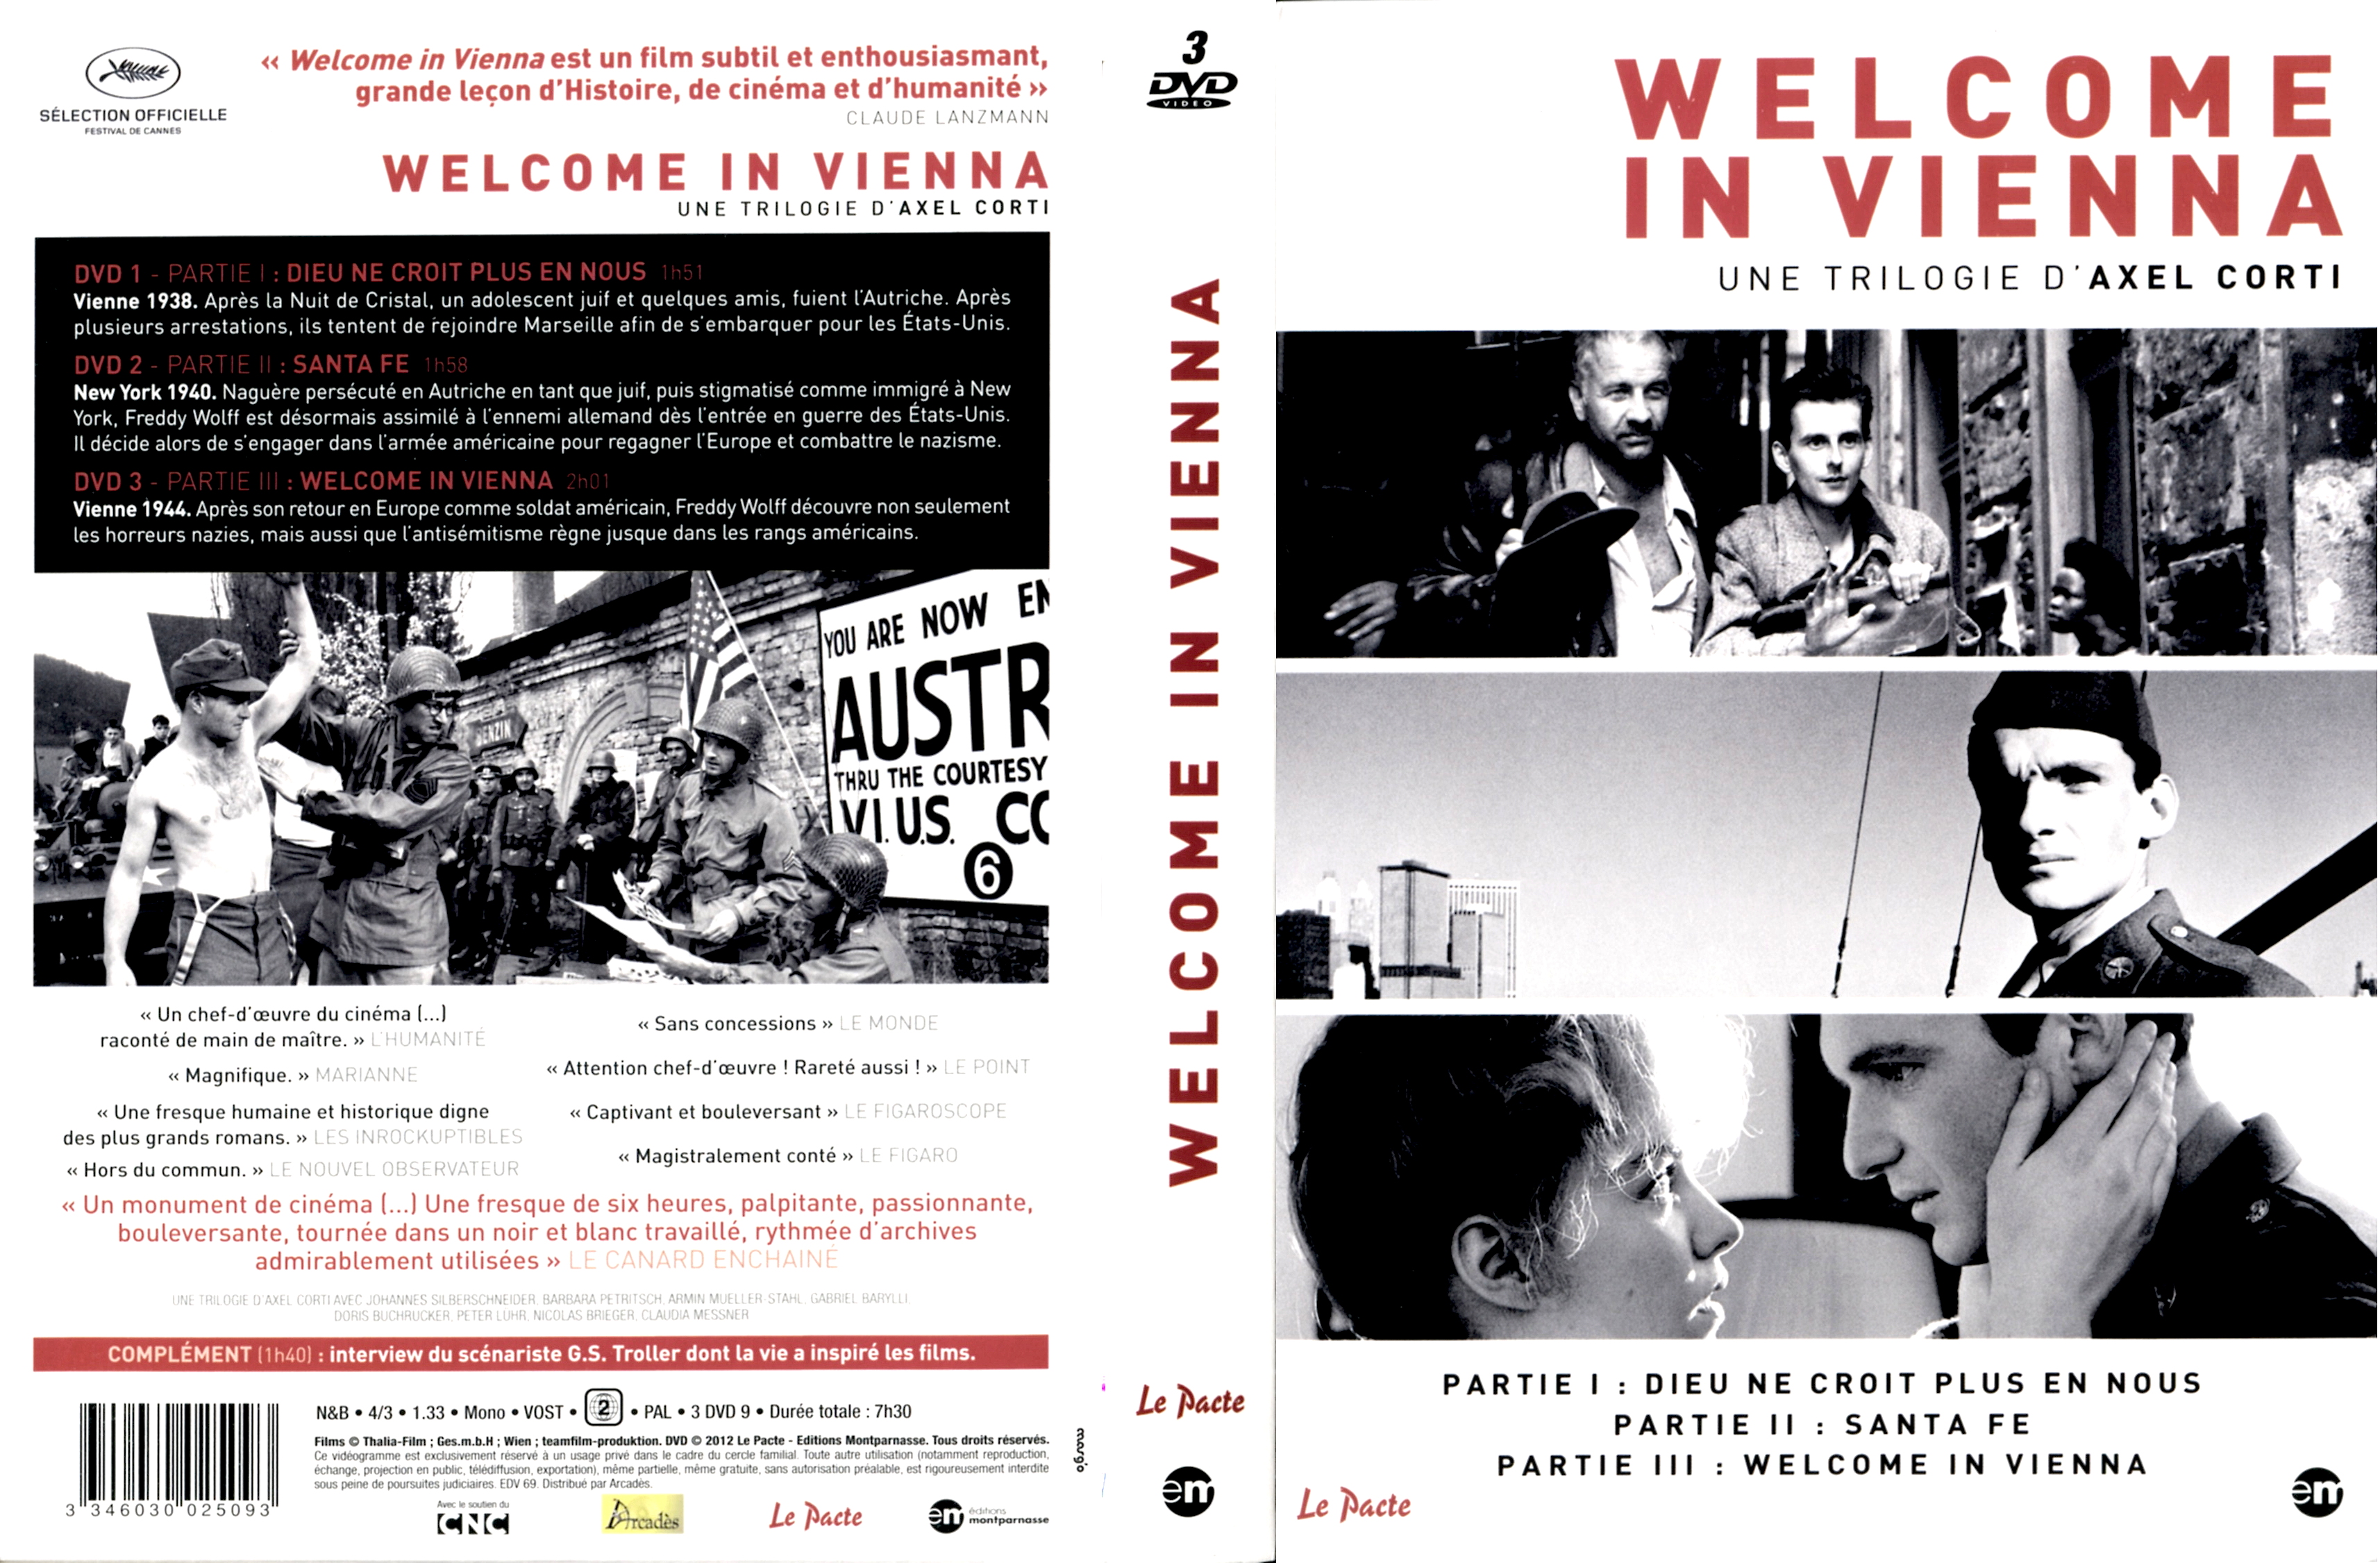 Jaquette DVD Welcome in Vienna